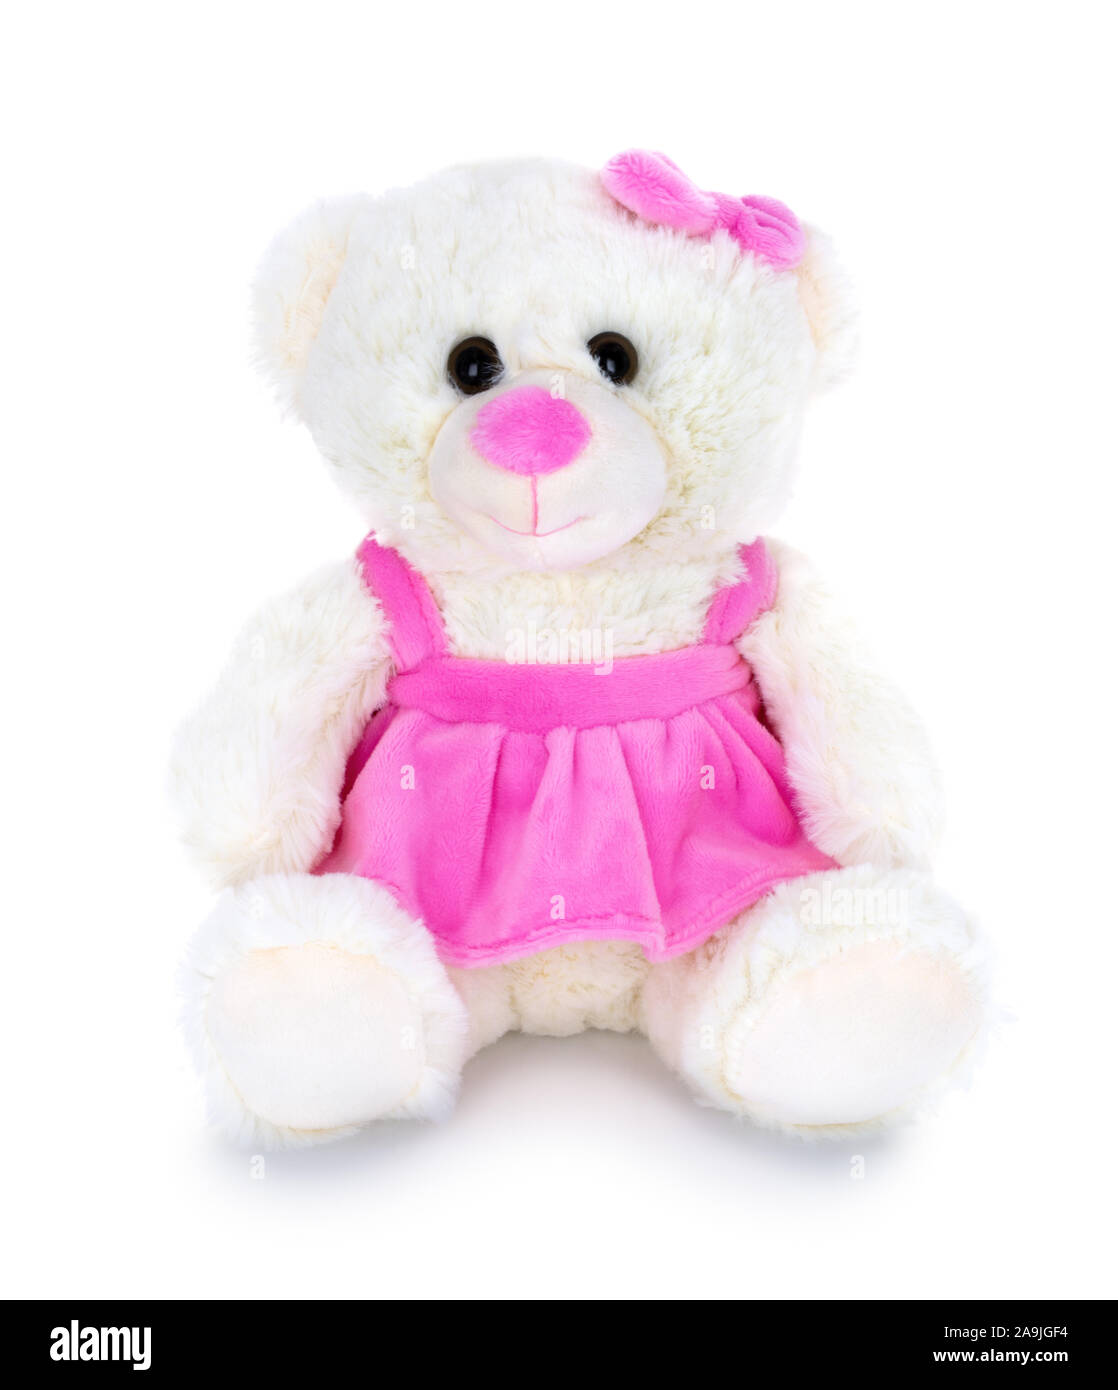 Cute white bear doll with pink skirt and ribbon isolated on white background with shadow reflection. Playful pinky bear sitting on white underlay. Ted Stock Photo